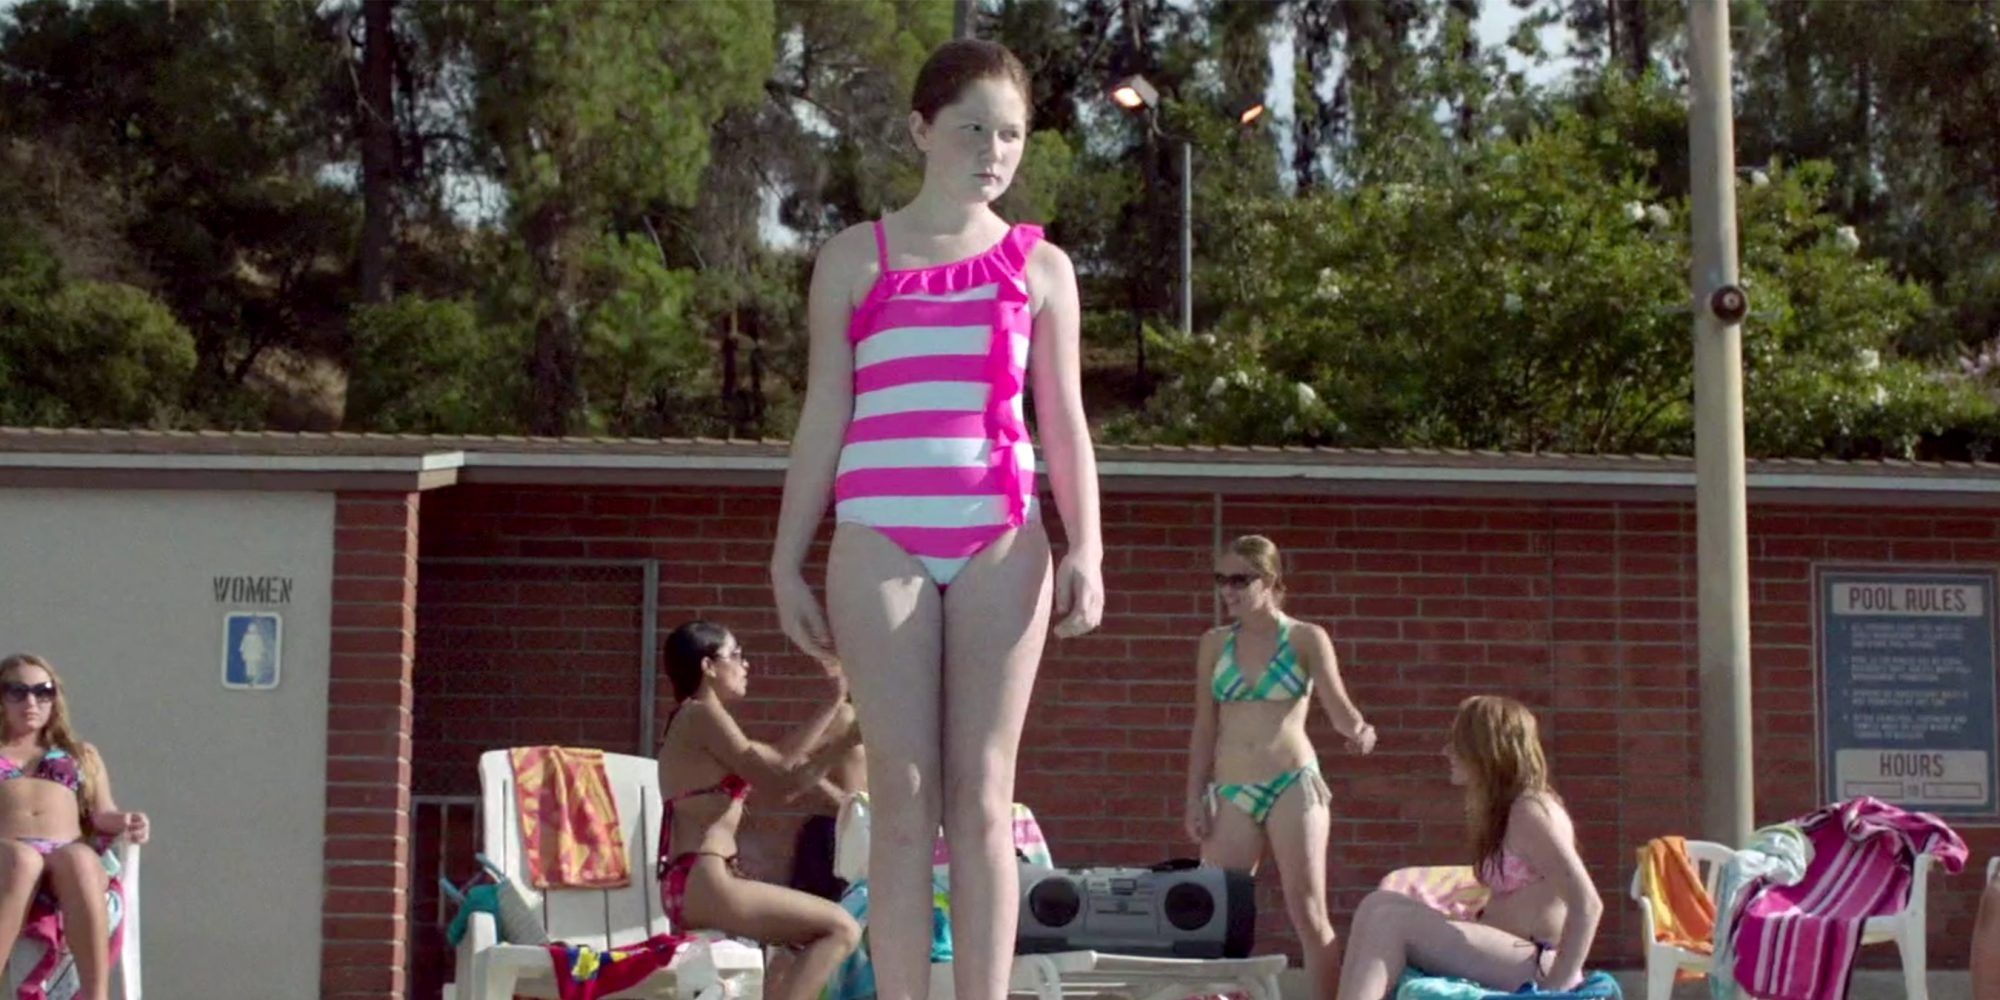 Debbie stands at the edge of the swimming pool in Shameless